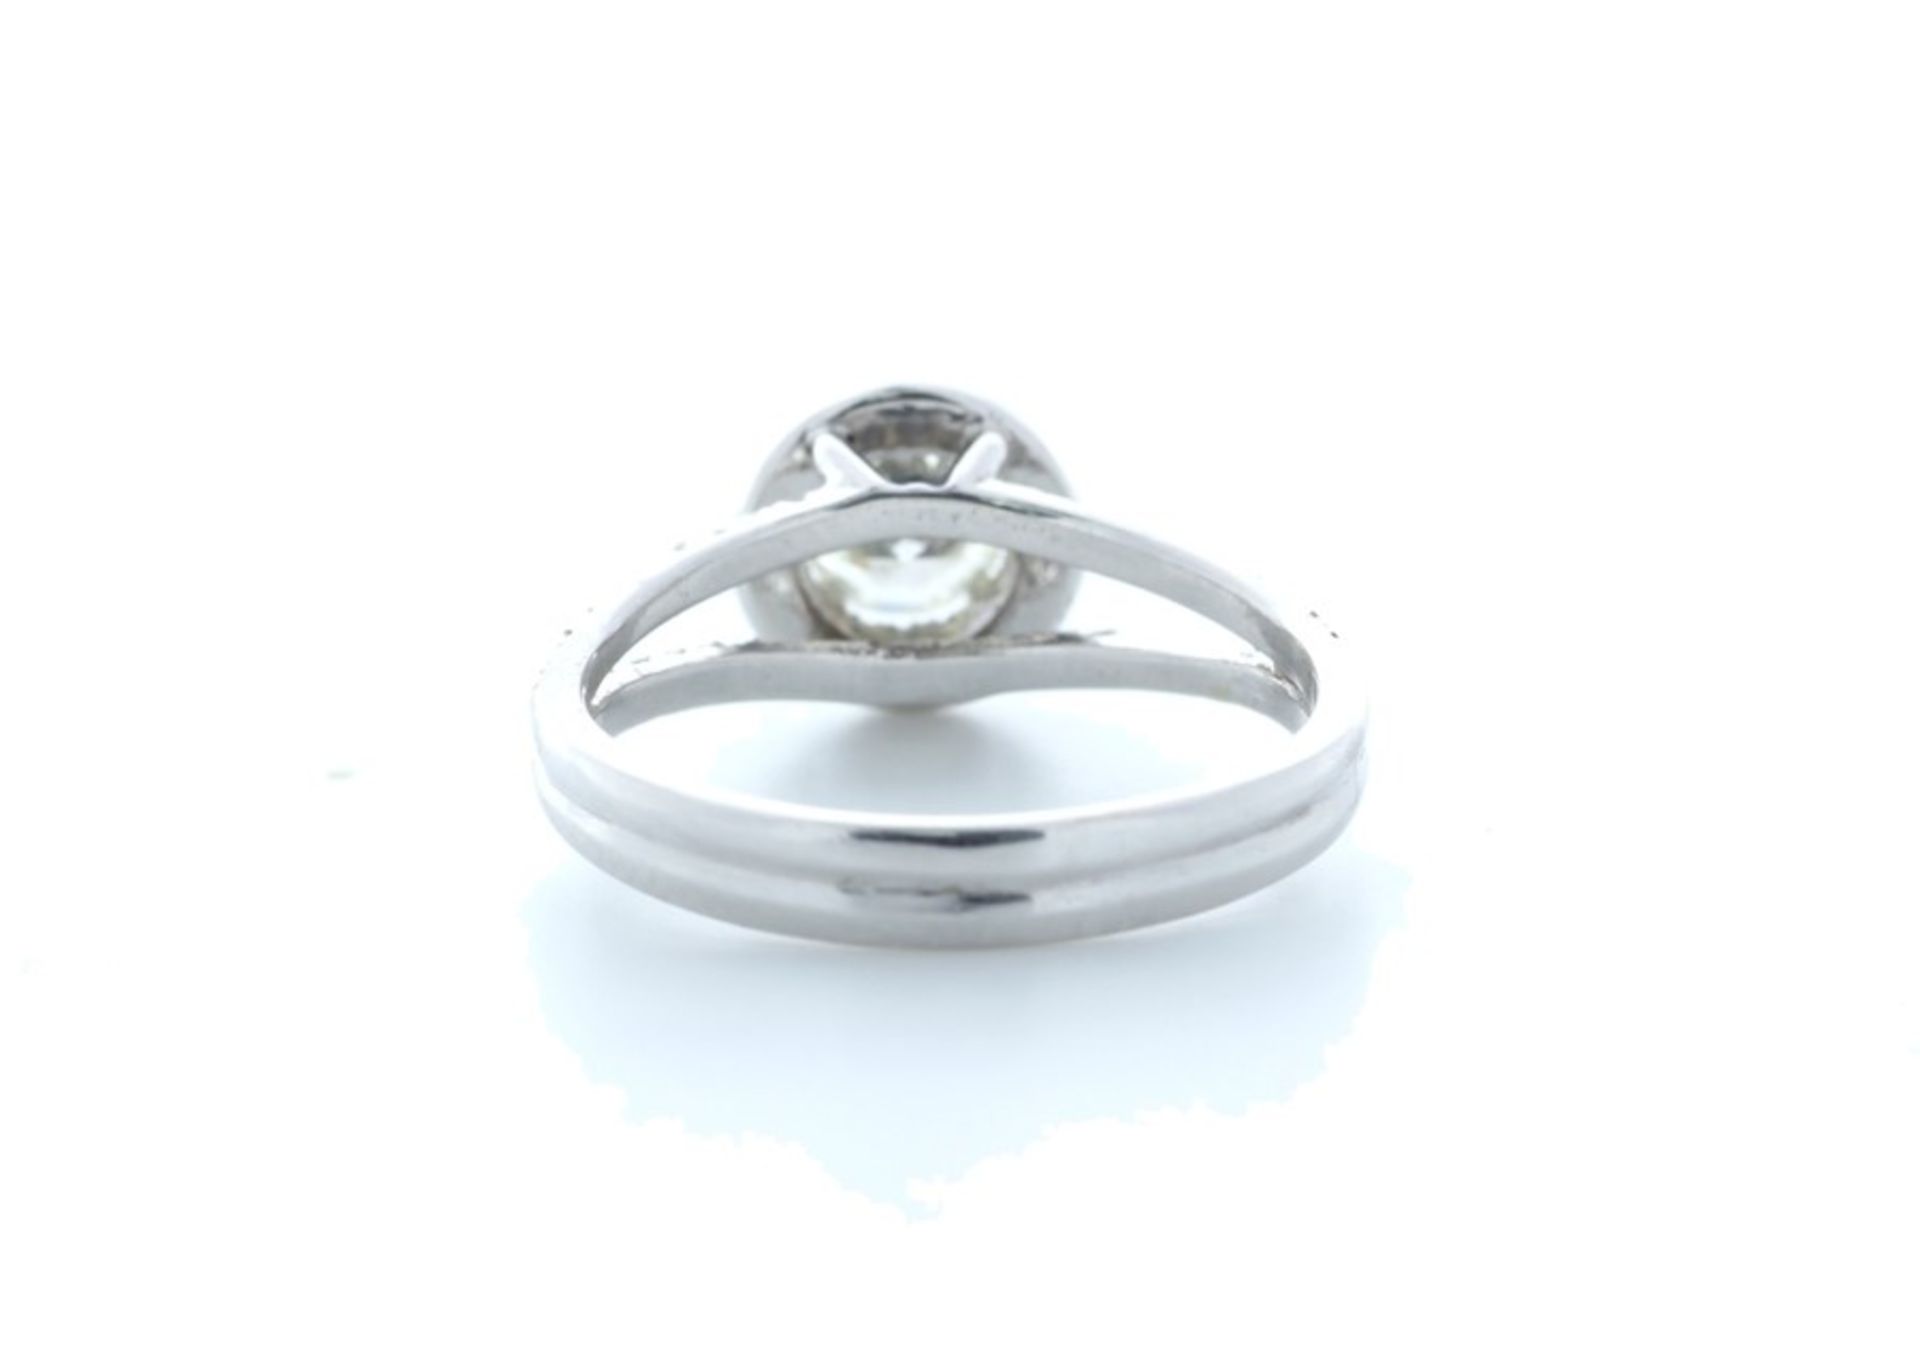 18ct White Gold Single Stone With Halo Setting Ring Valued by IDI £4,950.00 - Image 3 of 5